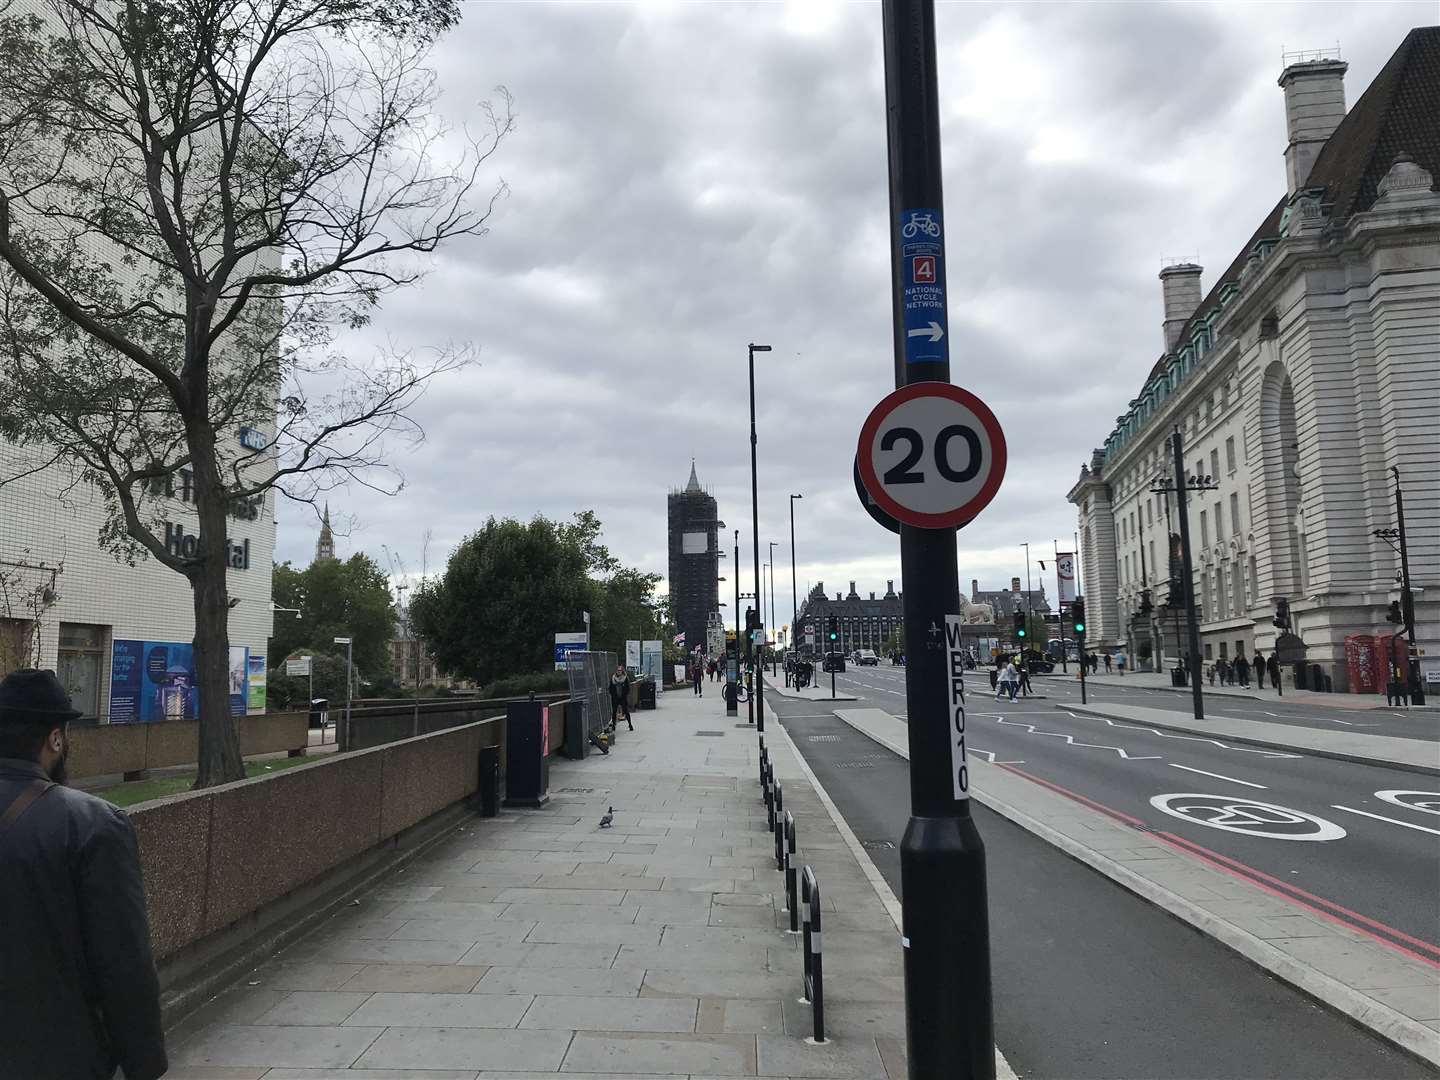 TfL has plans to introduce more 20mph limits by 2024